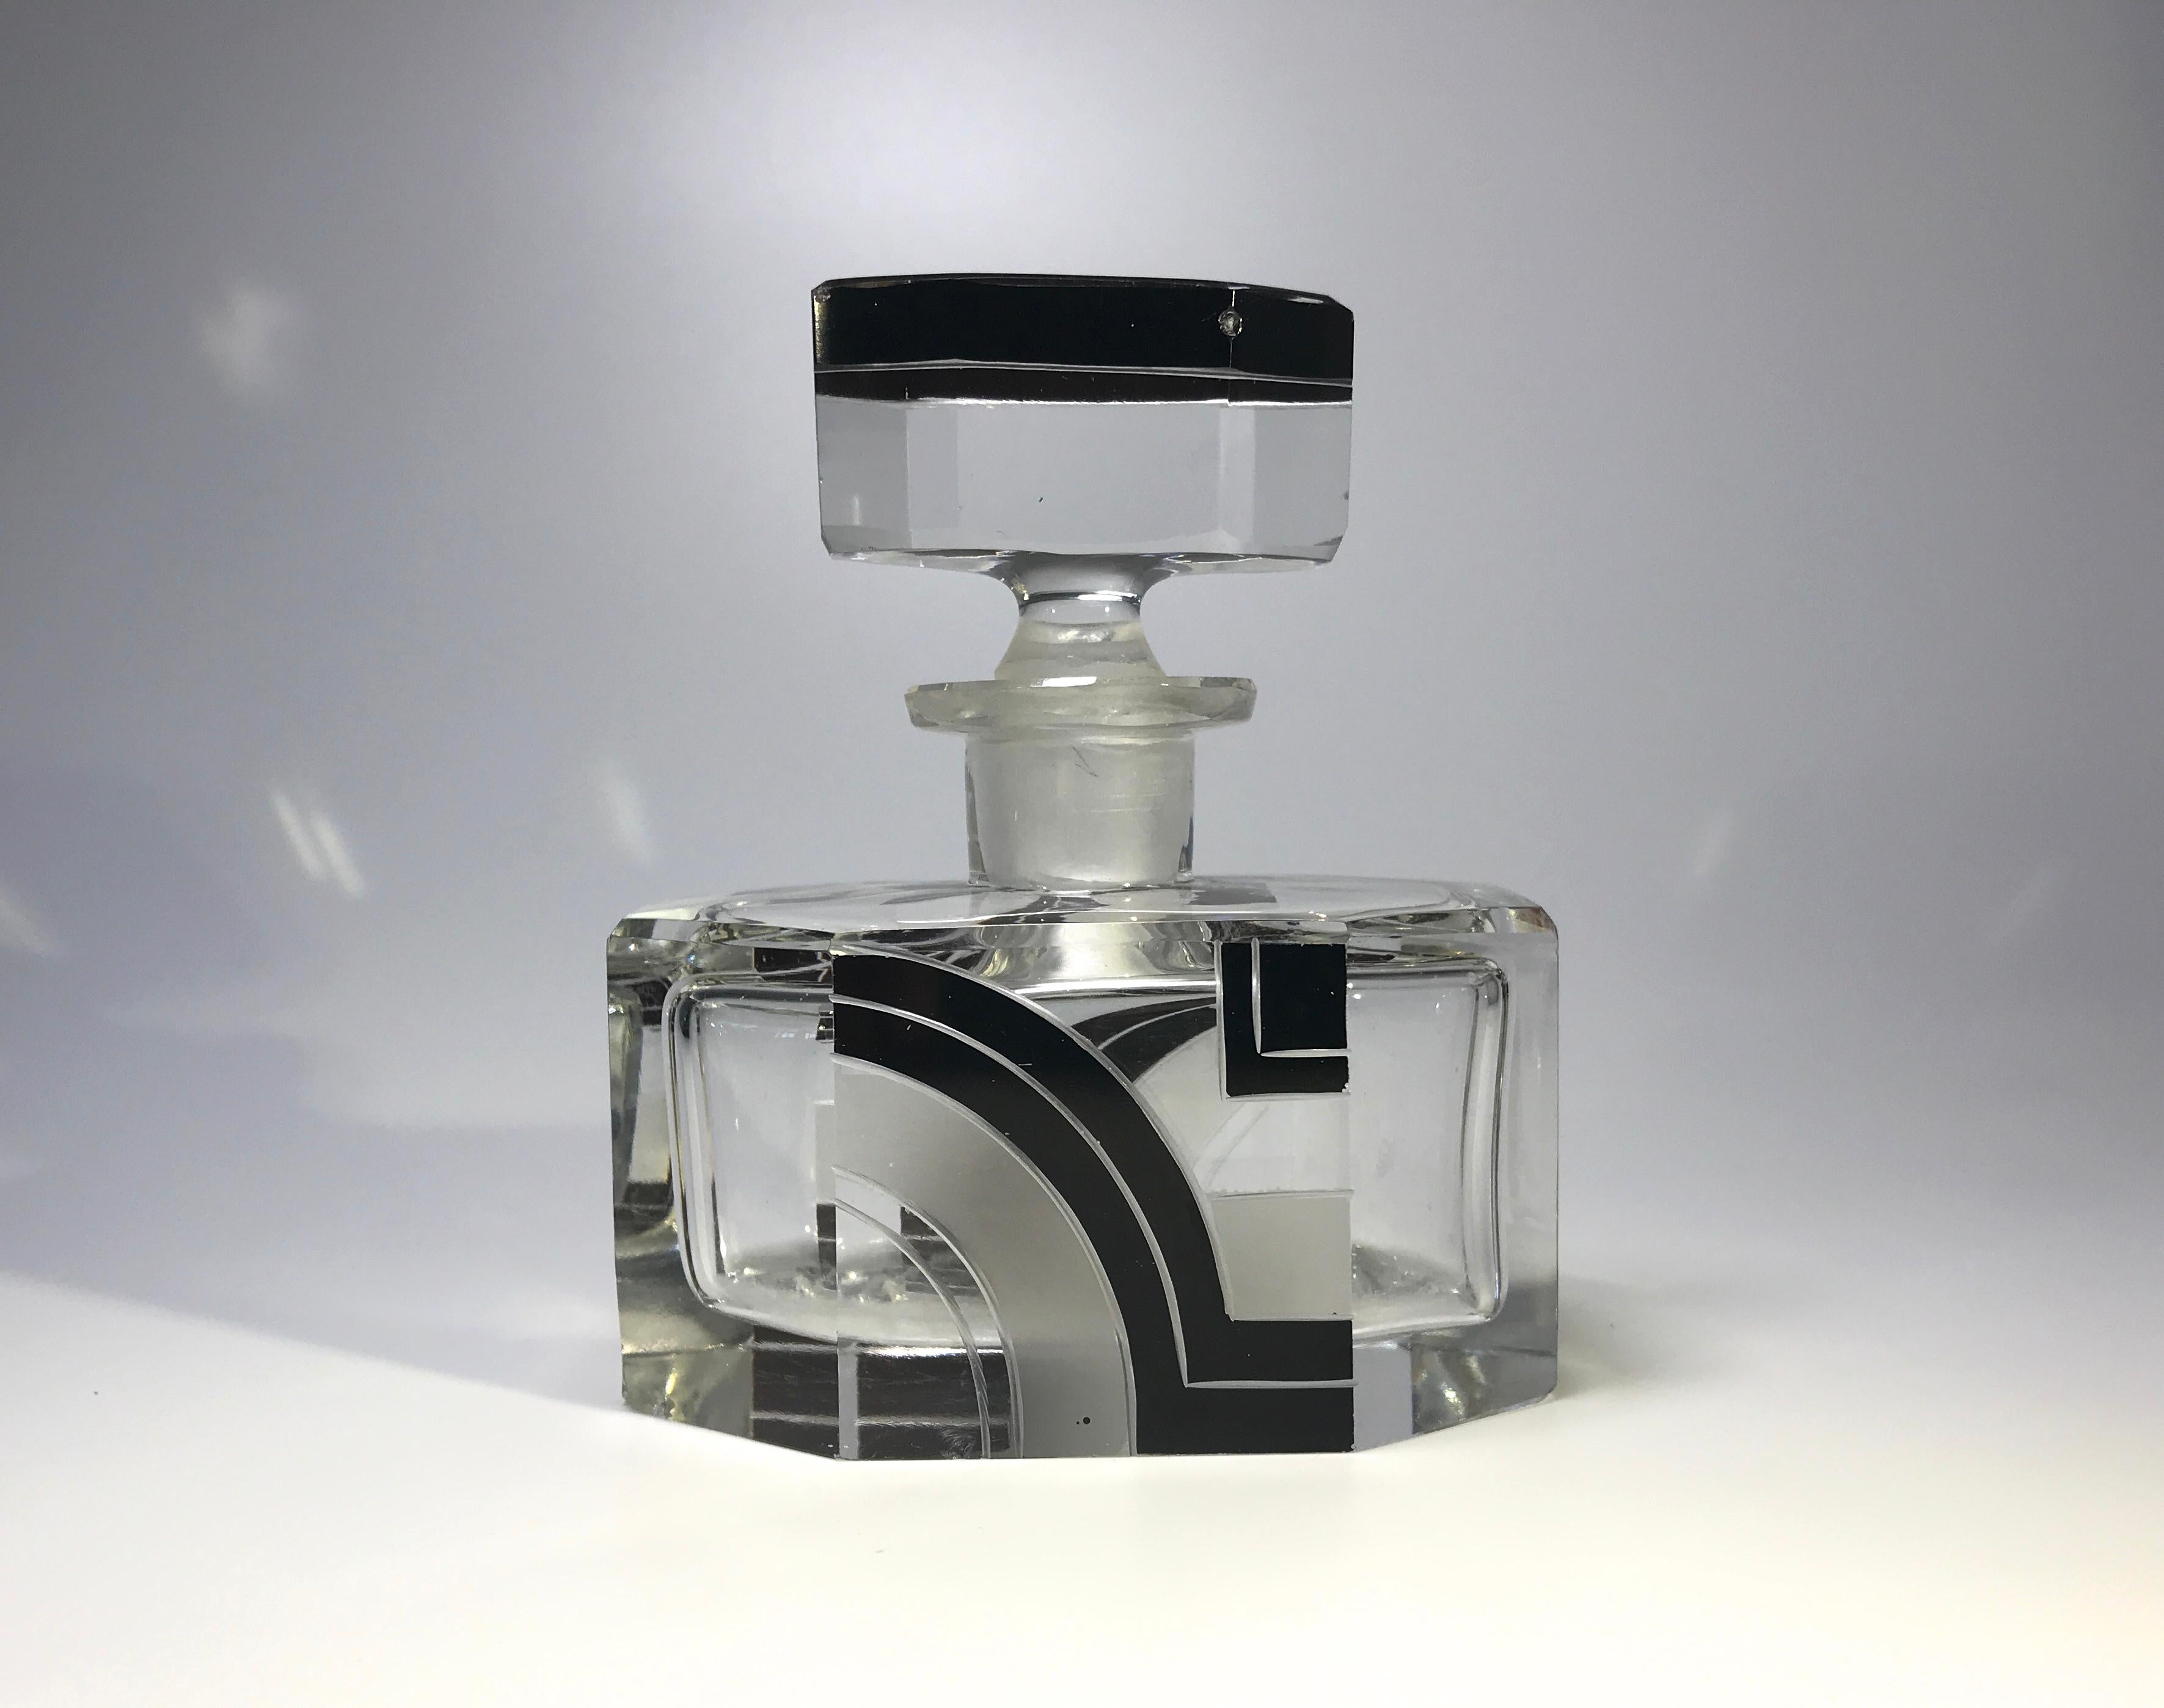 Fabulous Karl Palda Art Deco large crystal four piece vanity set from the 1930s
Consists of an impressive perfume bottle with stopper, atomiser, a large covered trinket box and a vanity tray
Superbly Classic, bold black enamel geometric